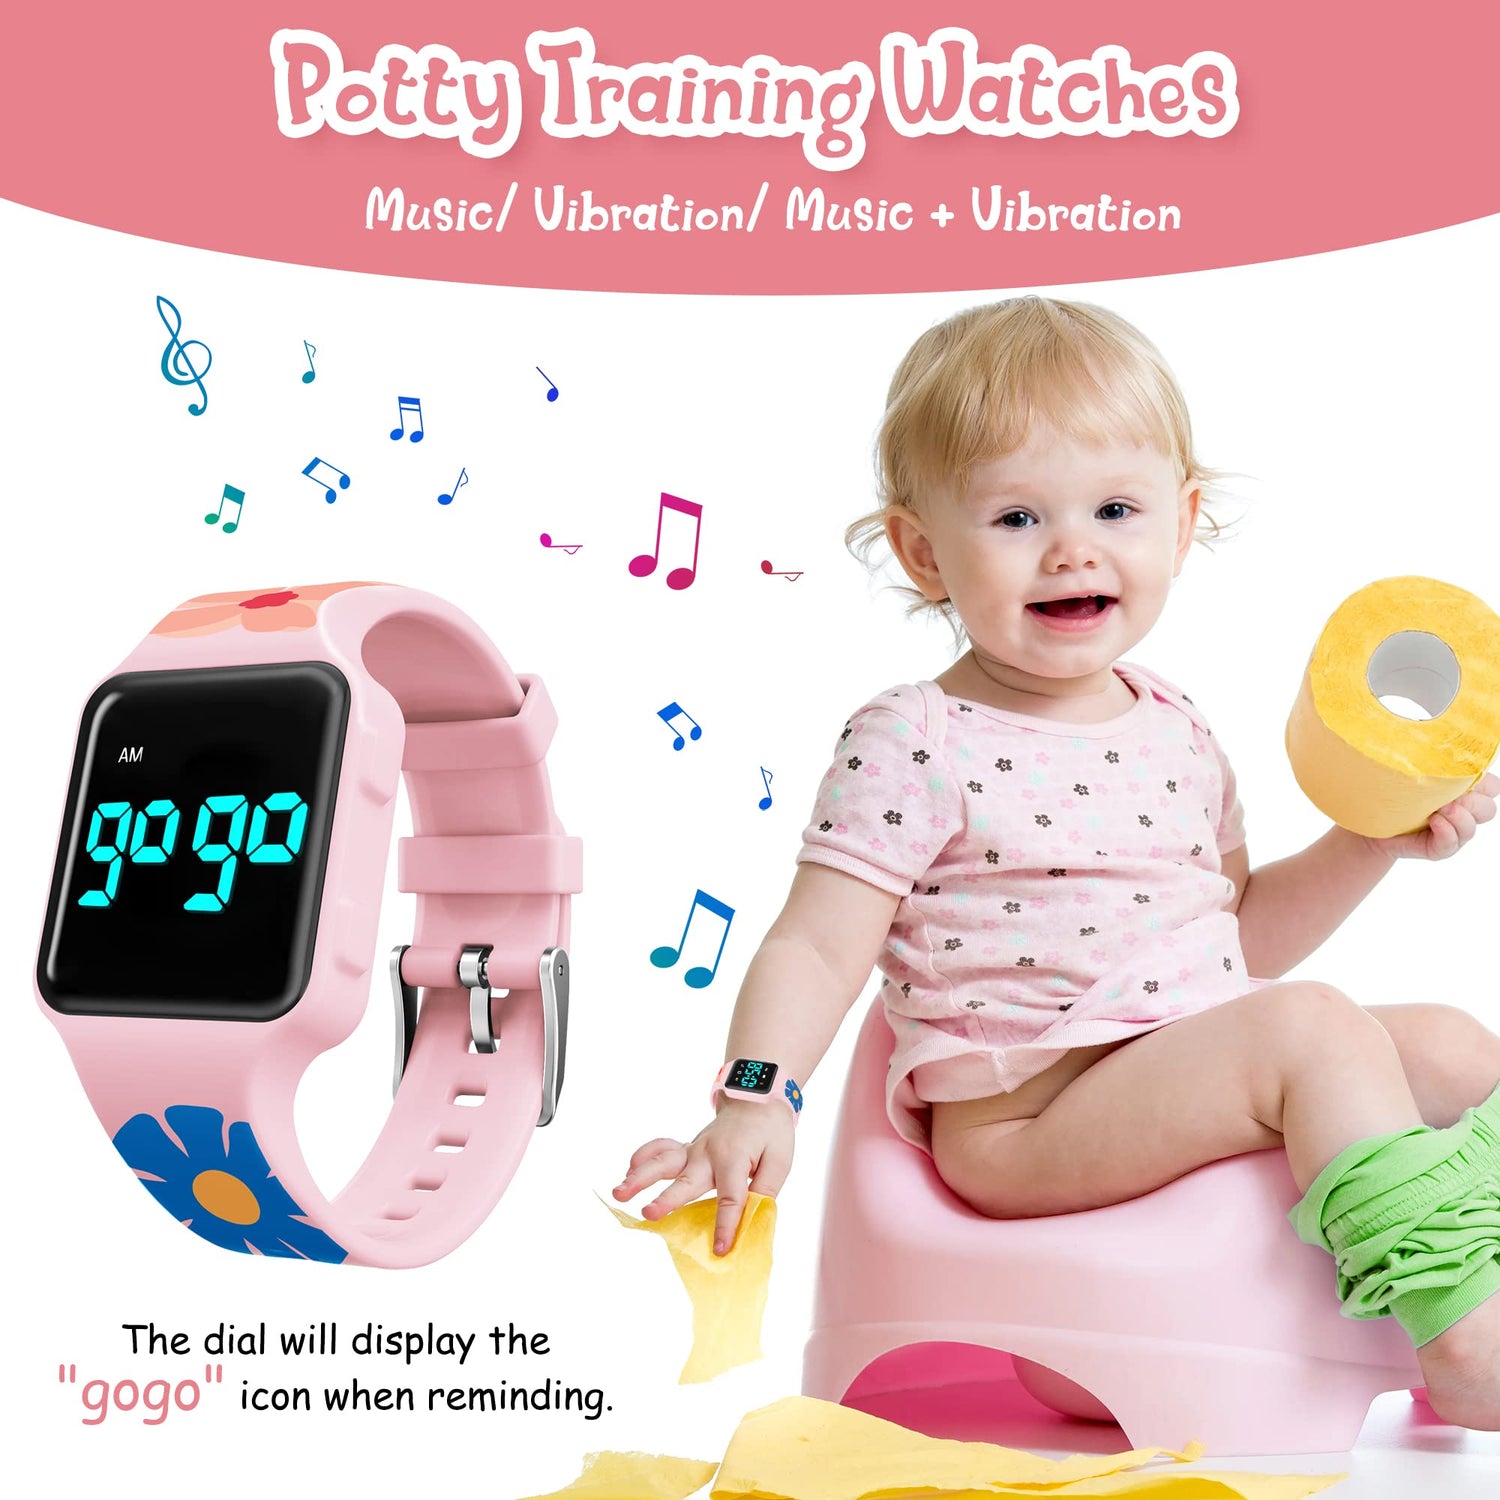 Potty Training Watches